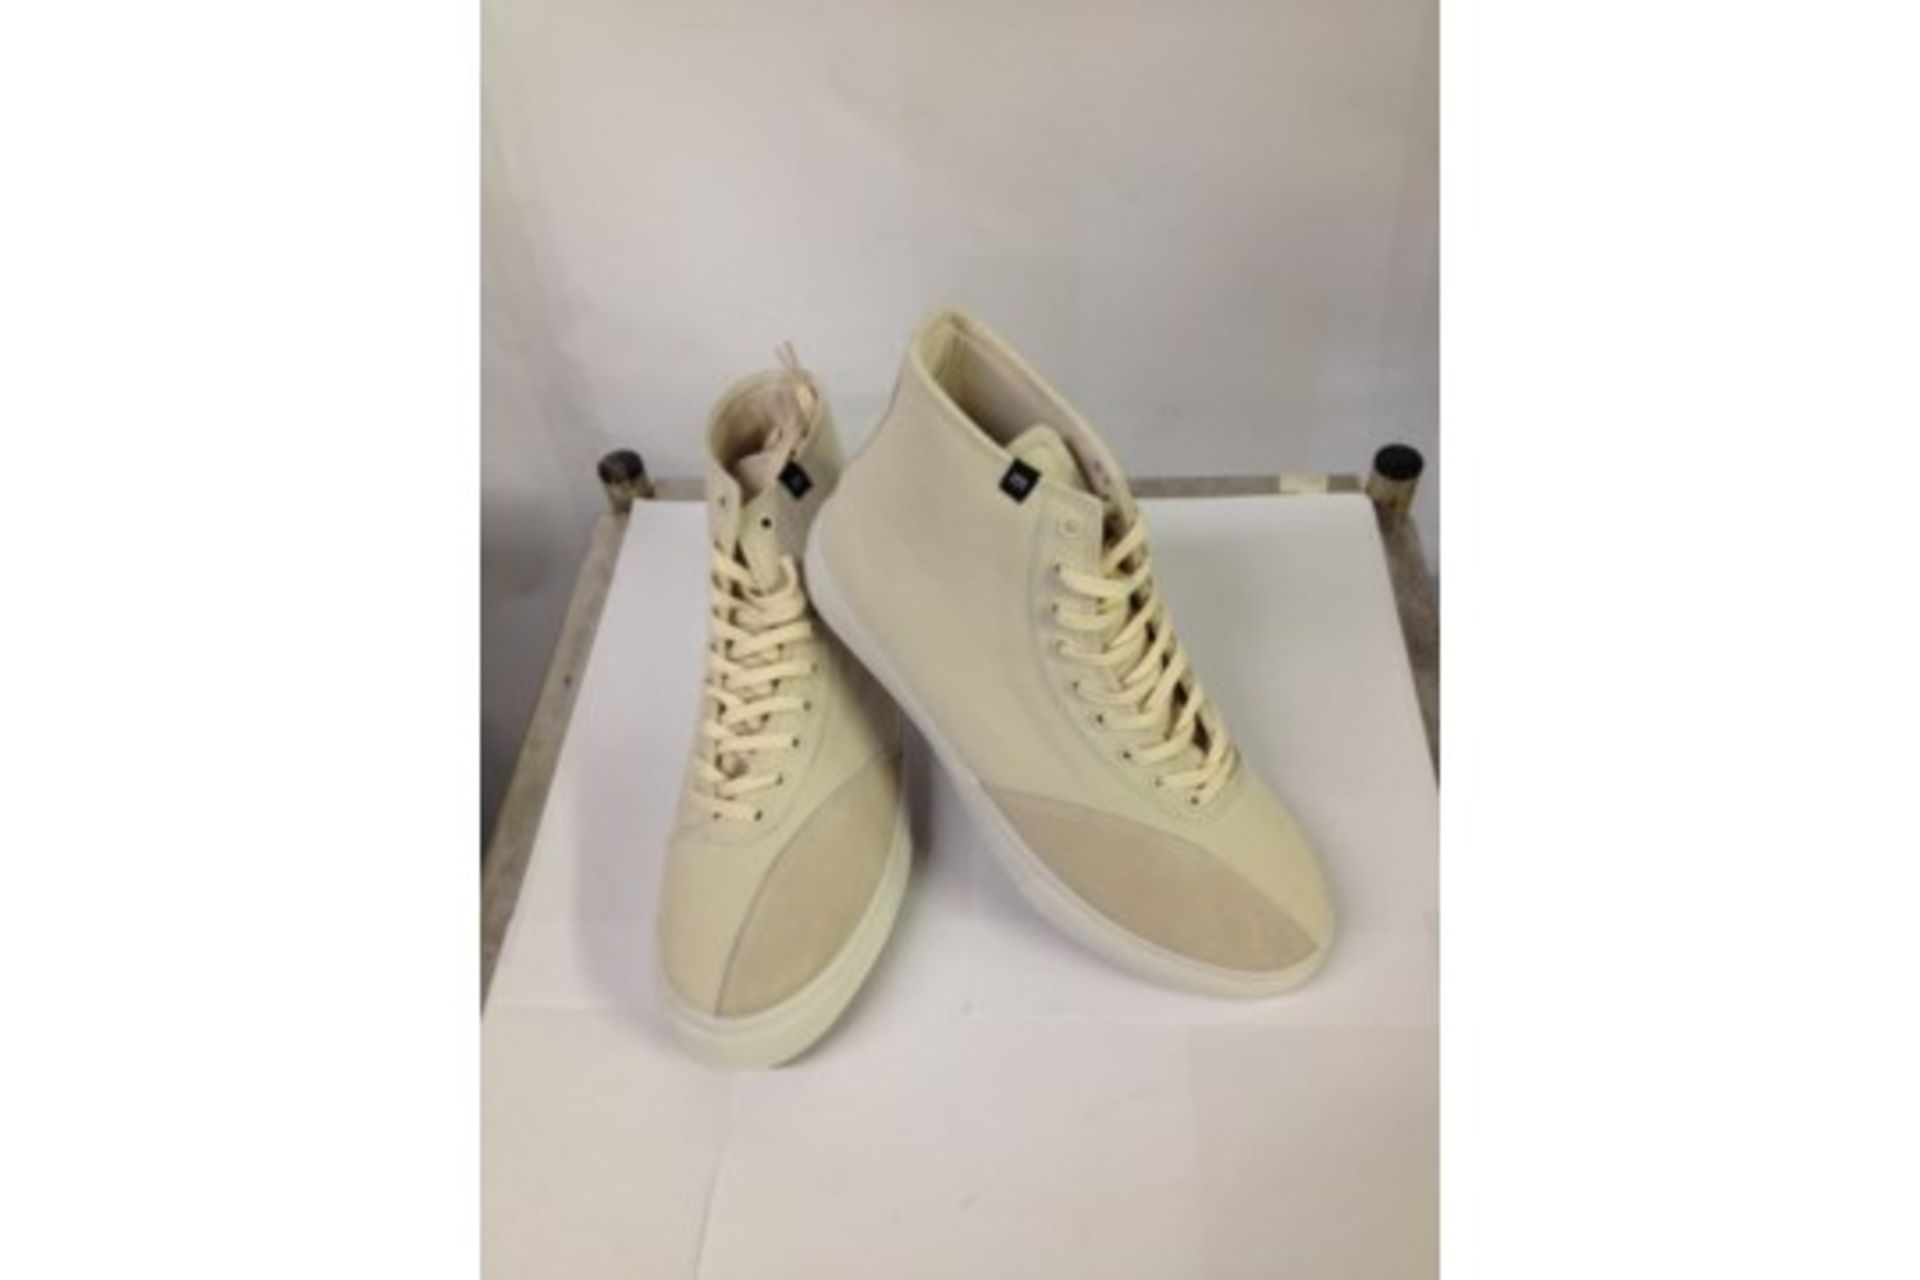 1 x Dodds High Top Sneakers | Colour: Winter White | UK Size: 7 | Unisex | RRP £ 55